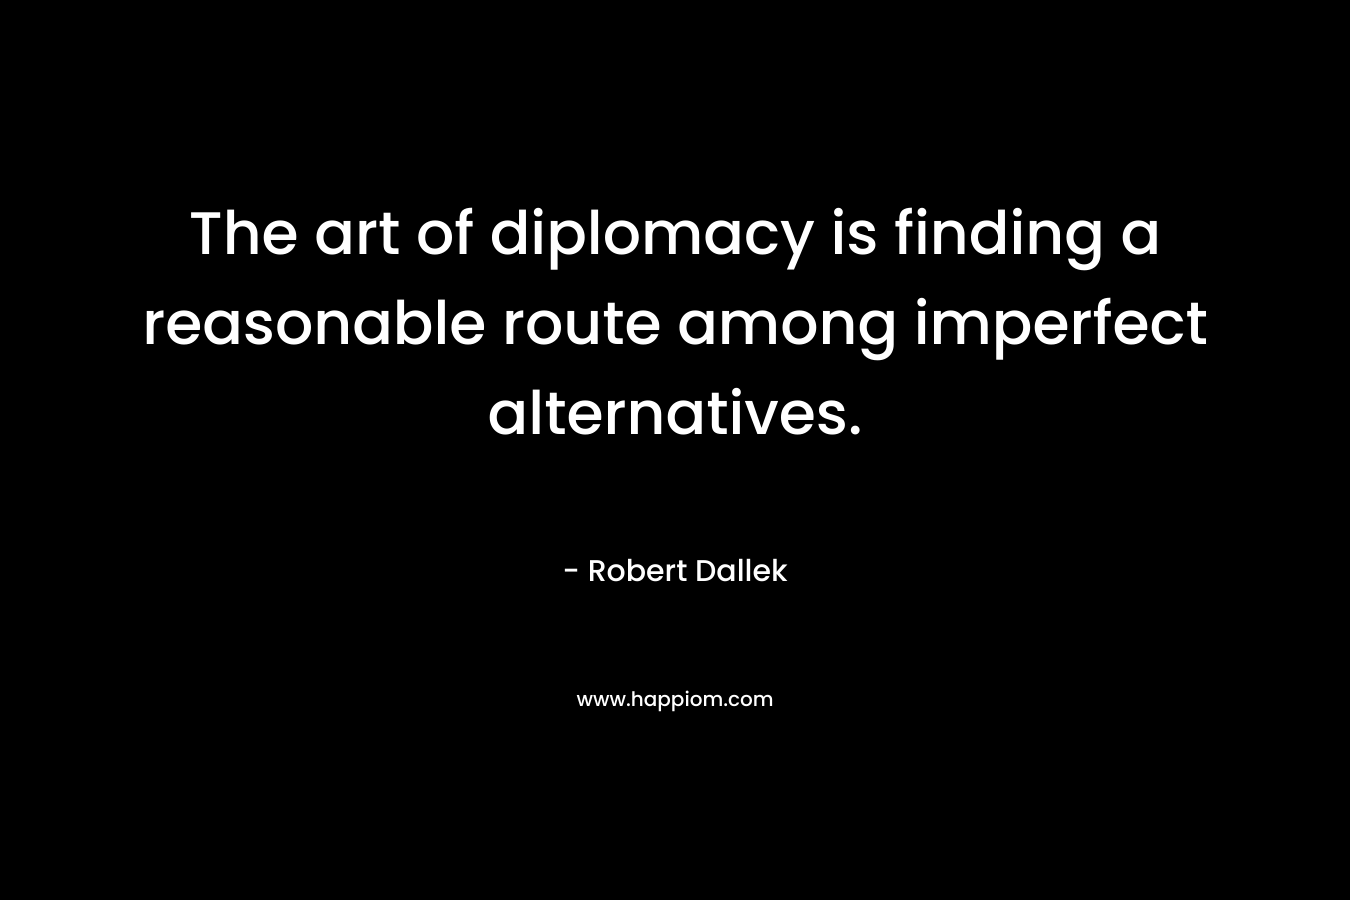 The art of diplomacy is finding a reasonable route among imperfect alternatives. – Robert Dallek